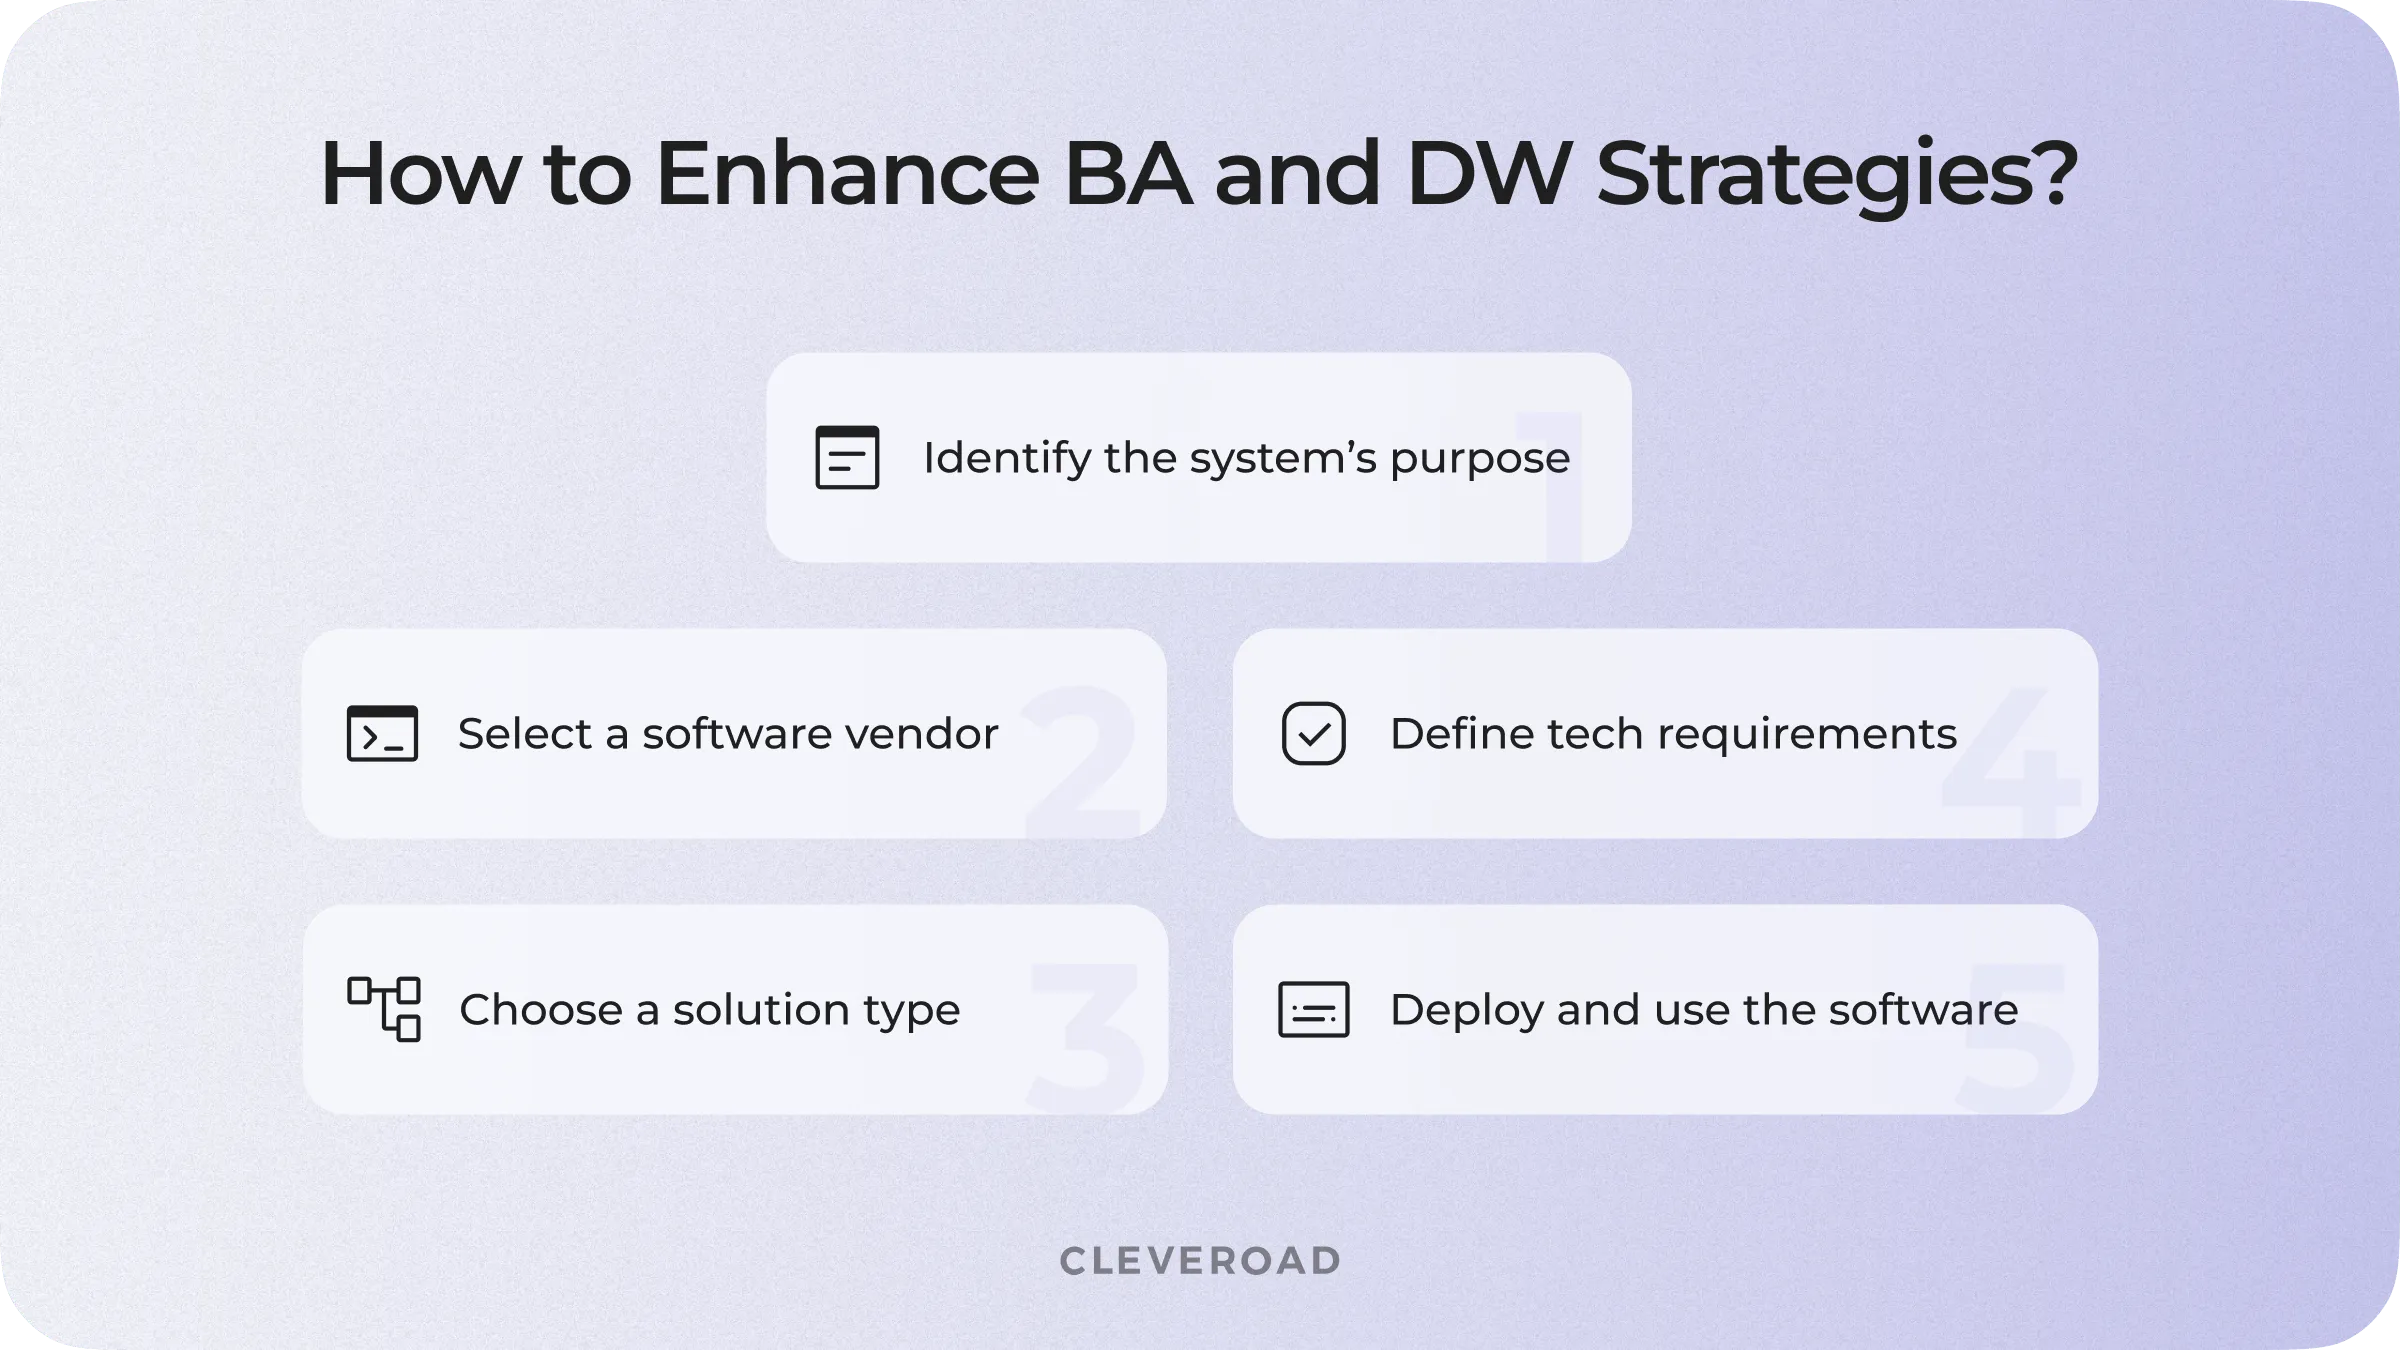 How to enhance BI and DW strategies